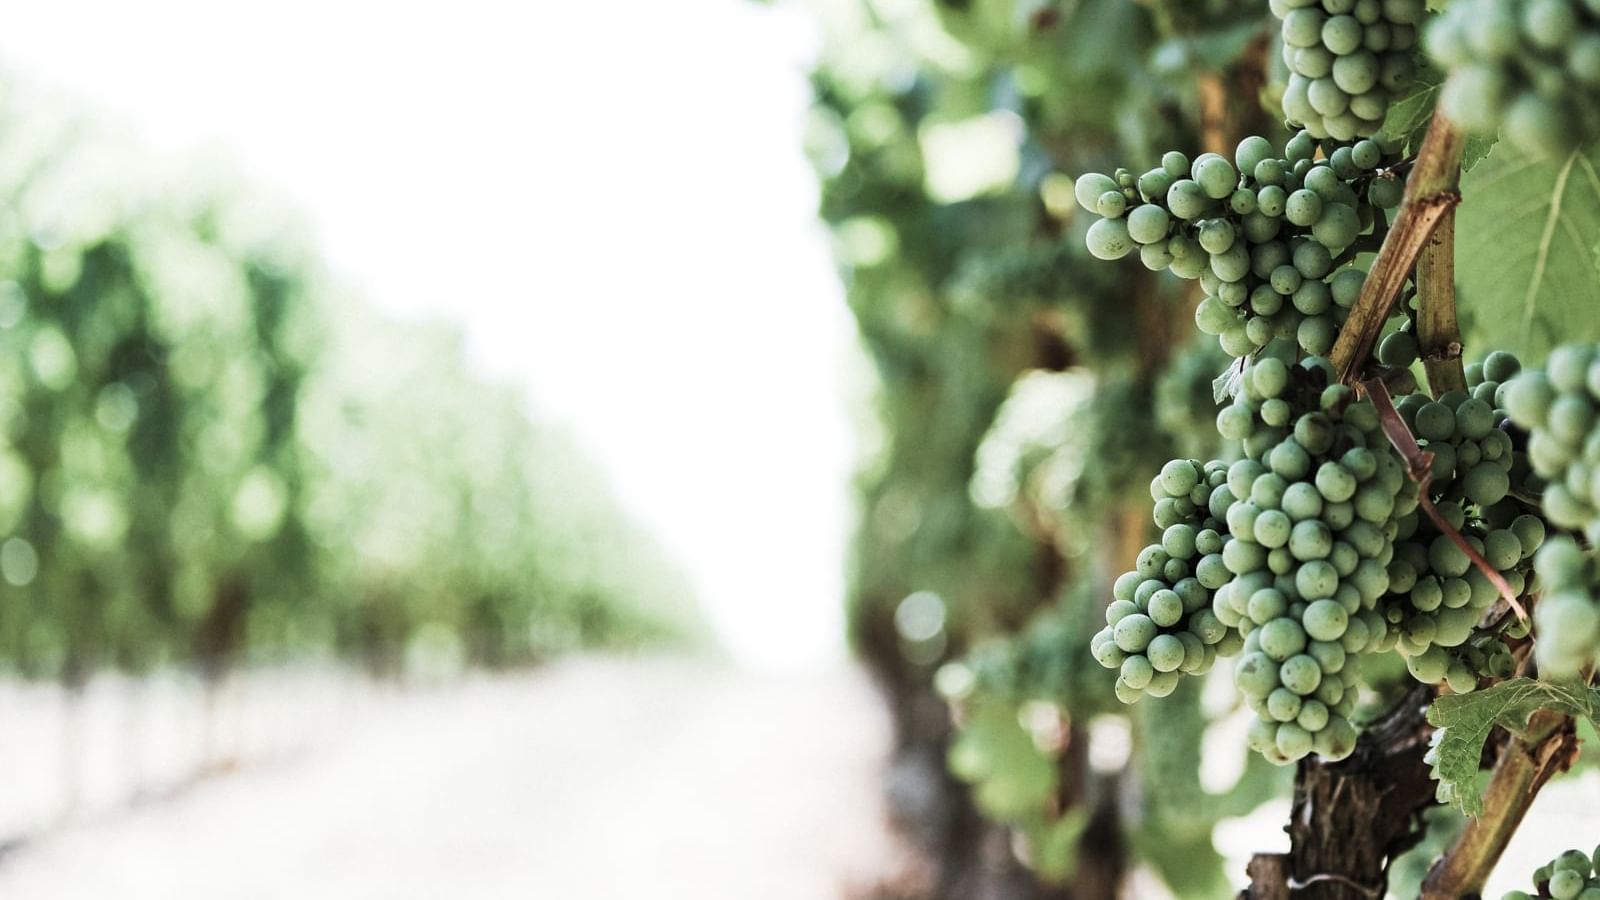 Closeup of grapes on vines in a vineyard near Originals Hotels